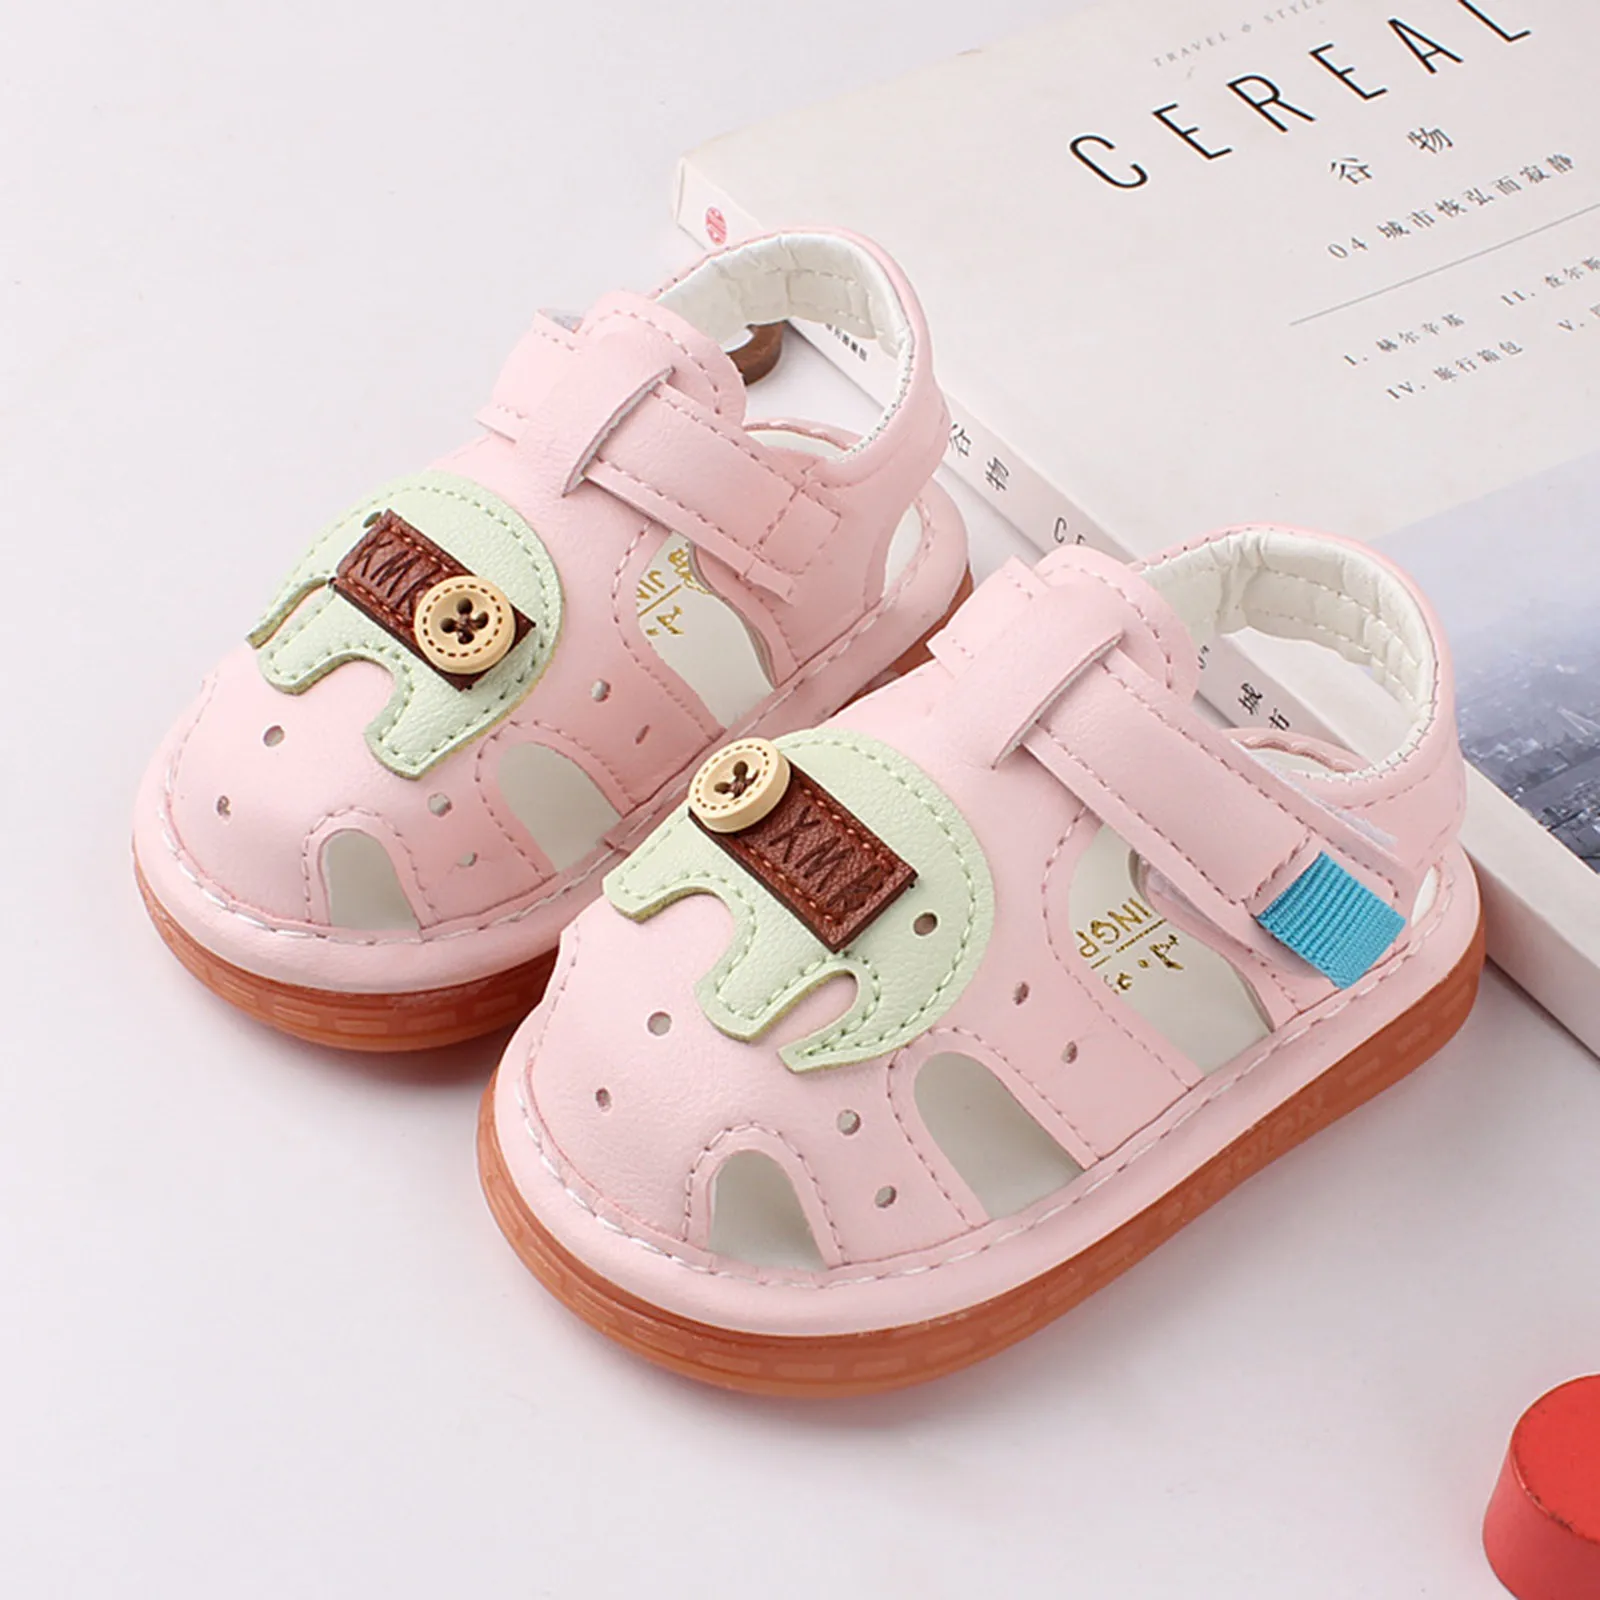 

Soft-Soled Baotou Sandals With Whistle Calling Shoes Infant Baby Shoes Vintage Bandage Roman Shoes Summer Beach Kids Sandals